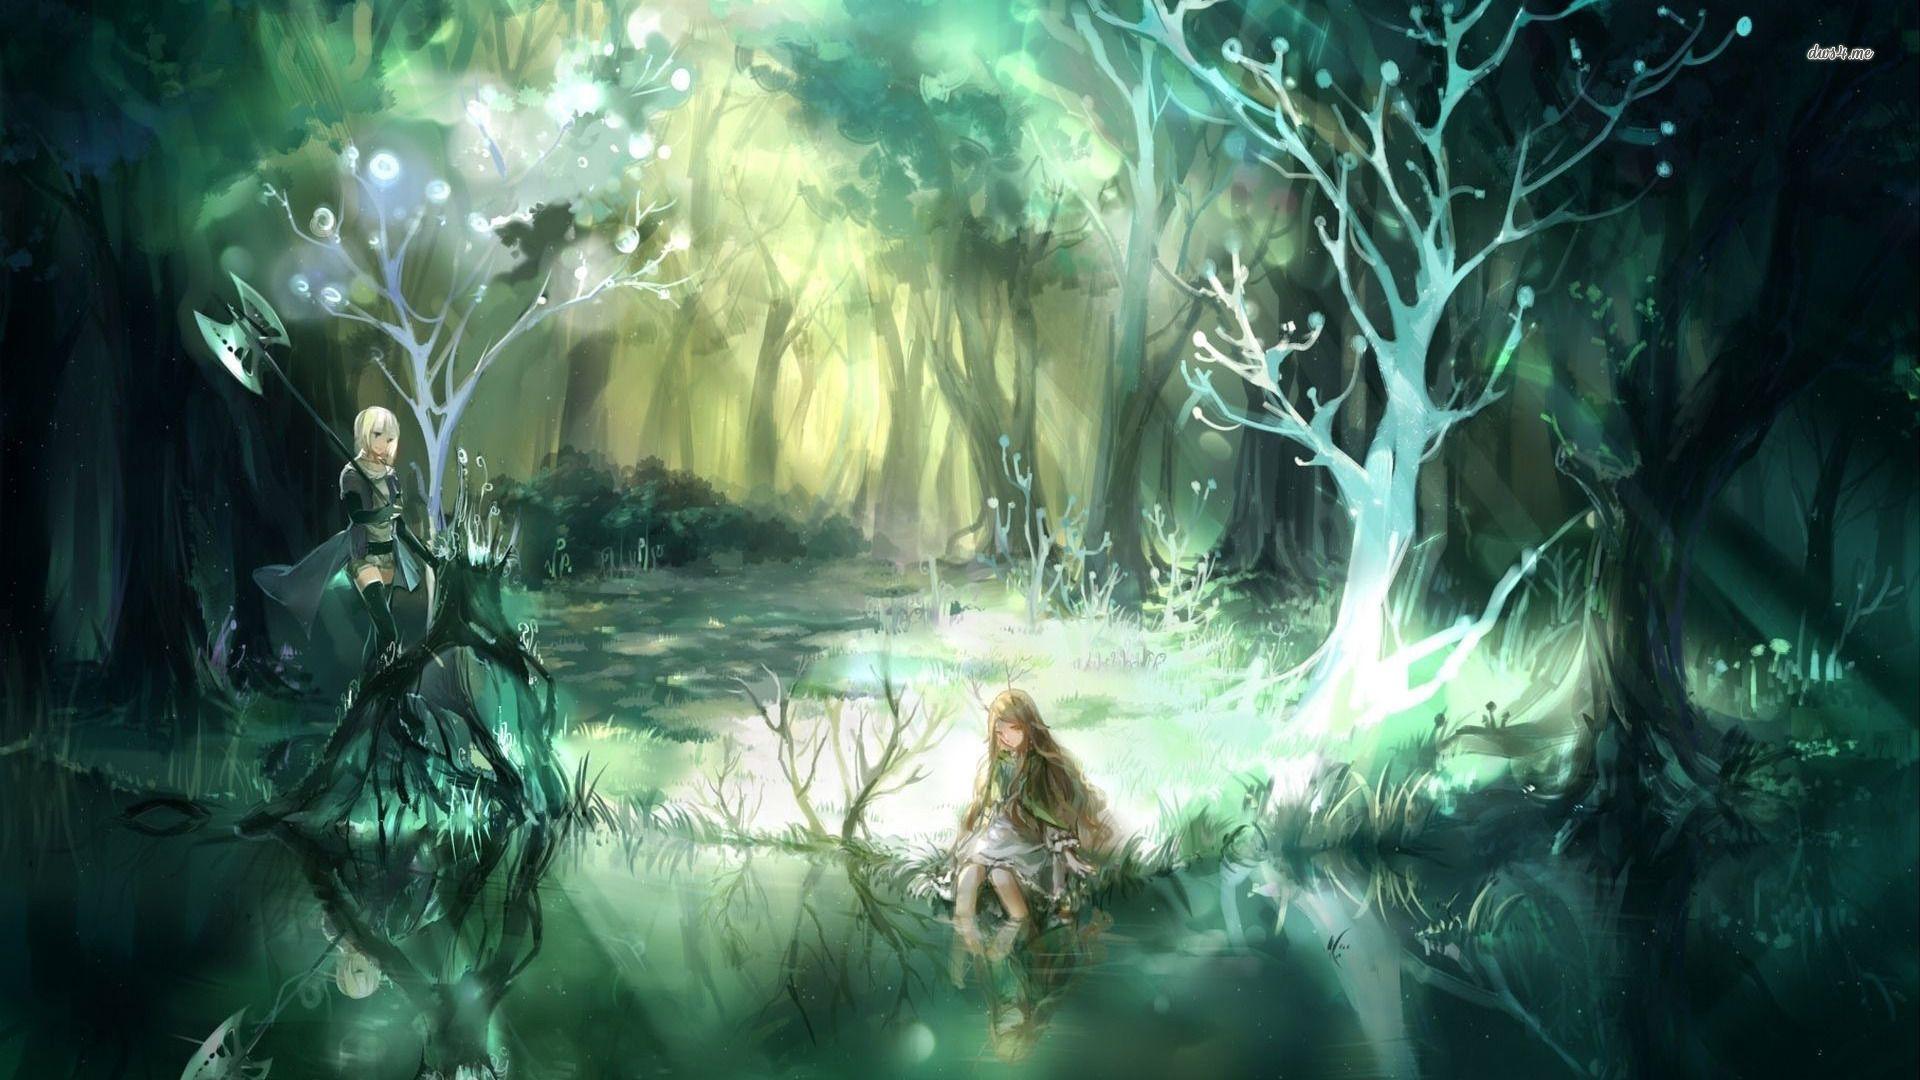 Pixies in the forest wallpaper. Fantasia, Anime scenery